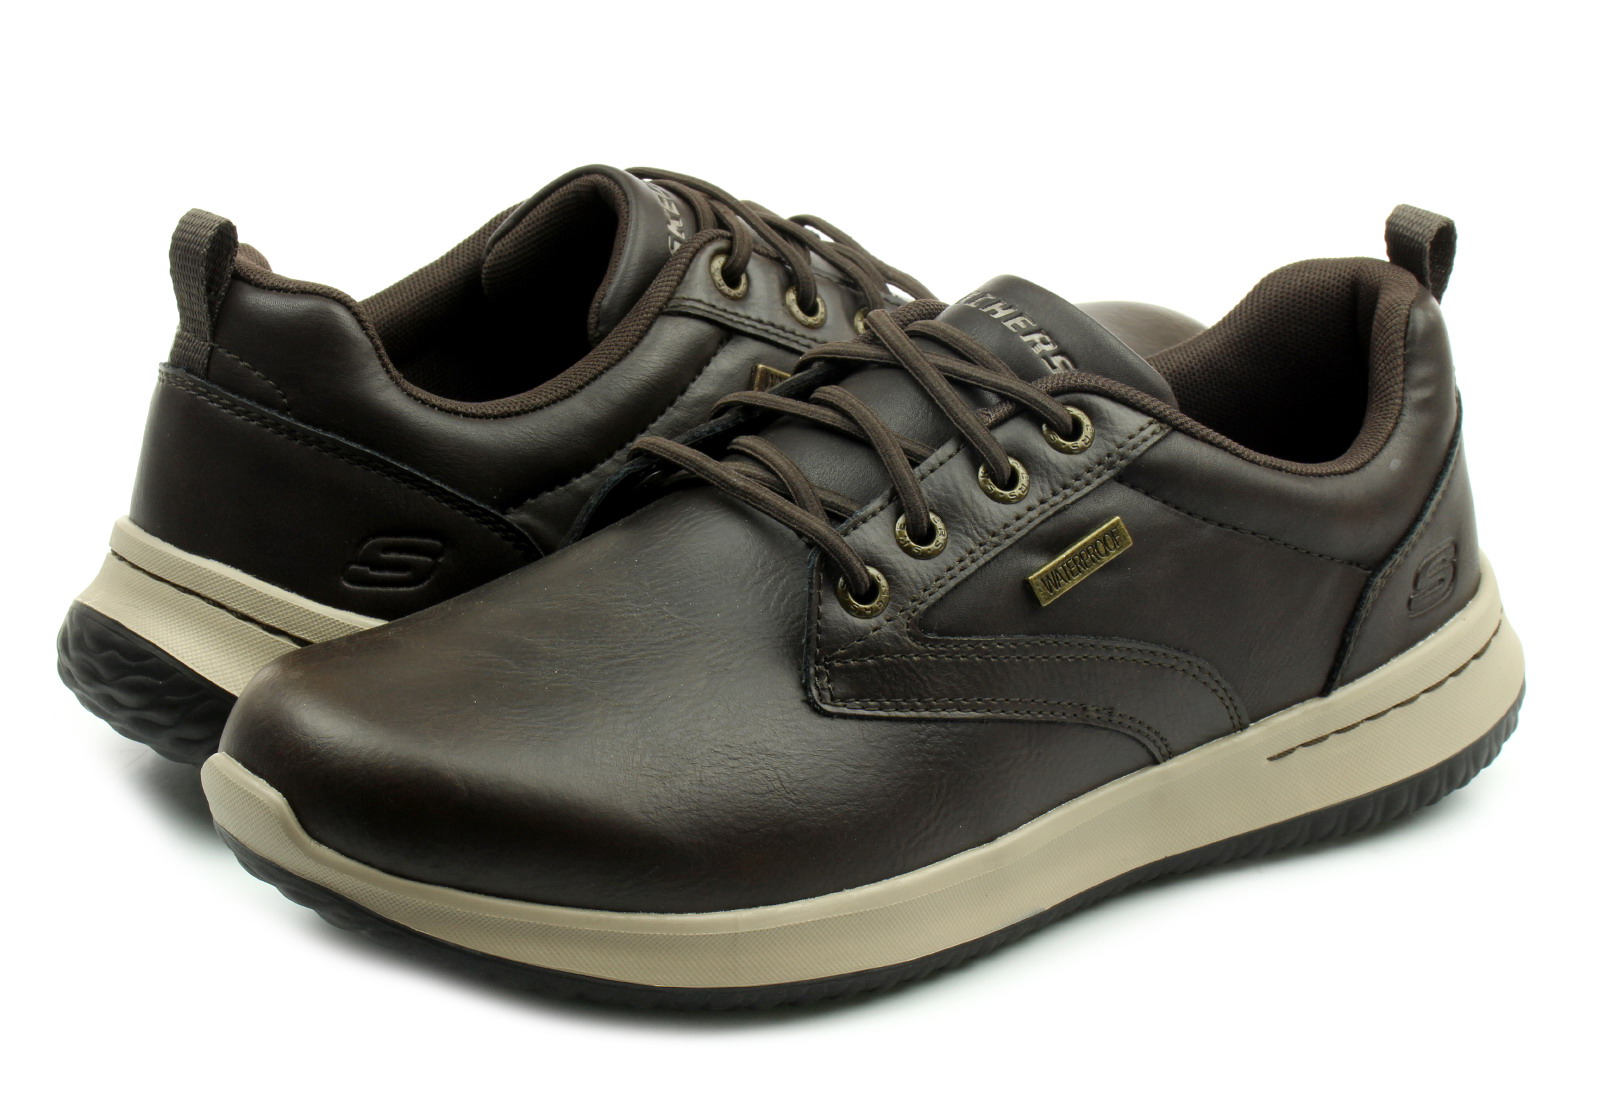 esquina Archivo Progreso Skechers Shoes - Delson- Antigo - 65693-choc - Online shop for sneakers,  shoes and boots